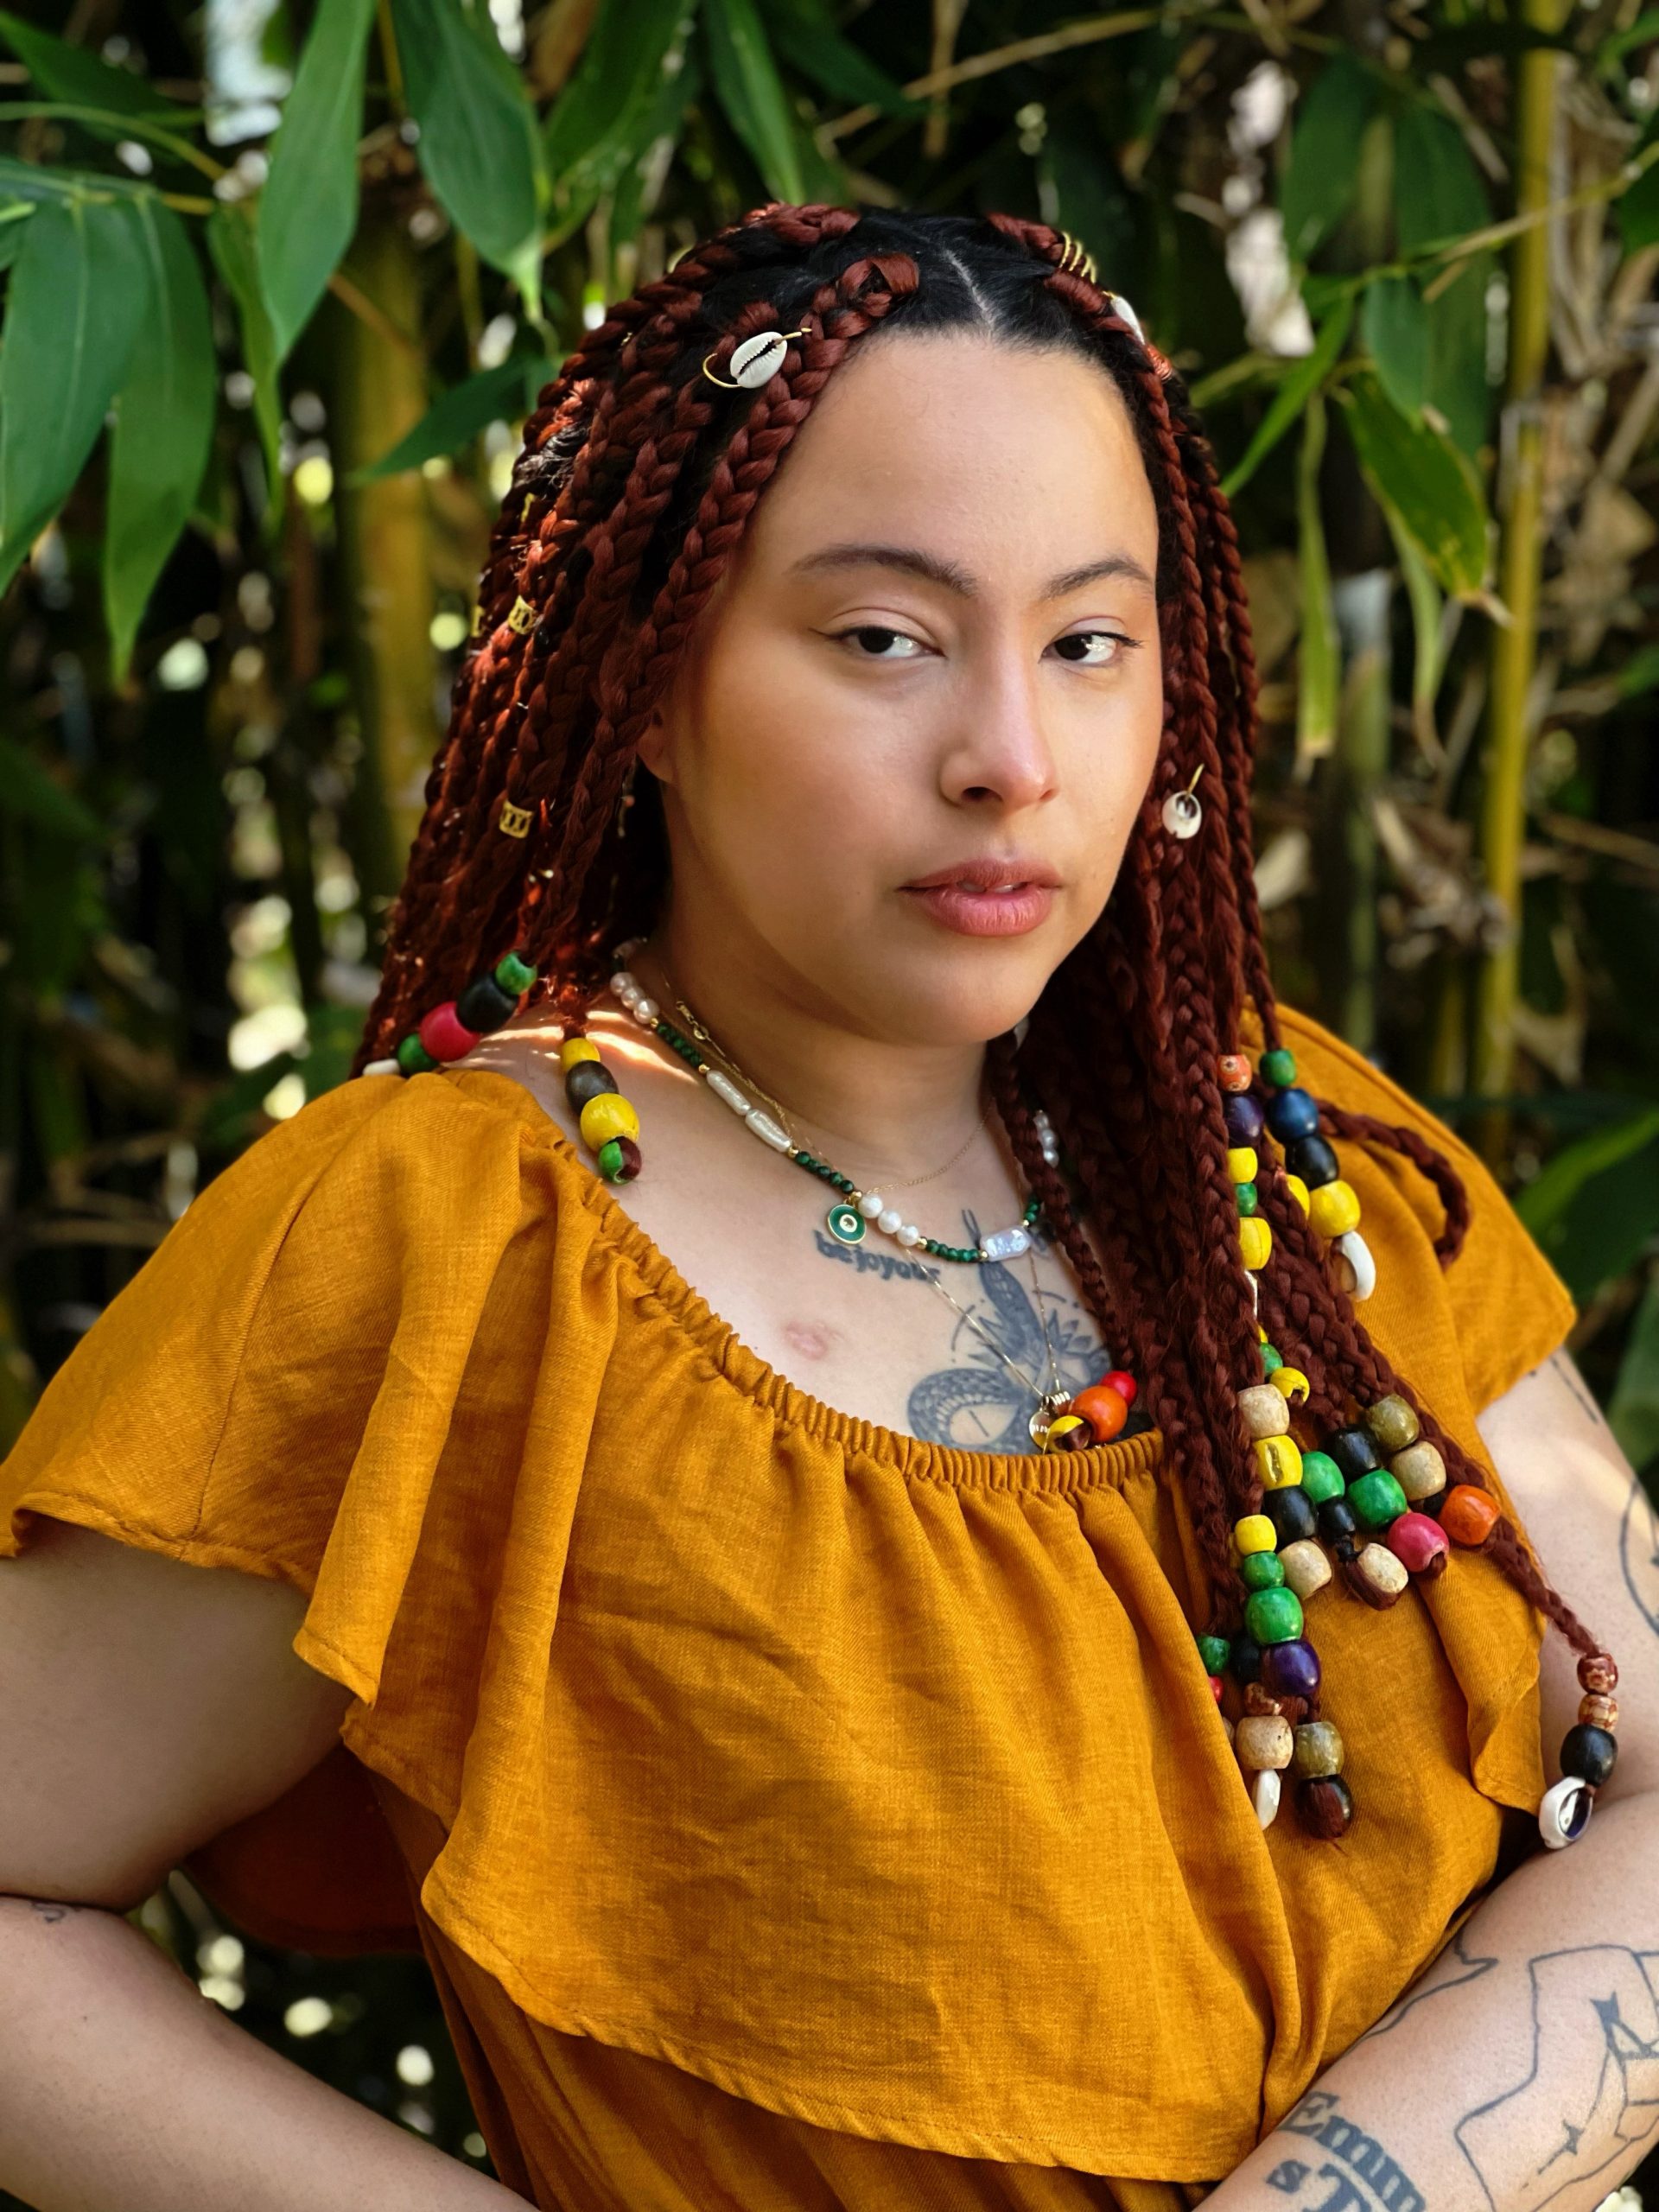 photo of Walela Nehanda, a Black nonbinary person with dark braids threaded with colorful beads and shells, a beaded necklace, a deep yellow layered top, and tattoos. they stand in front of green foliage with a powerful expression